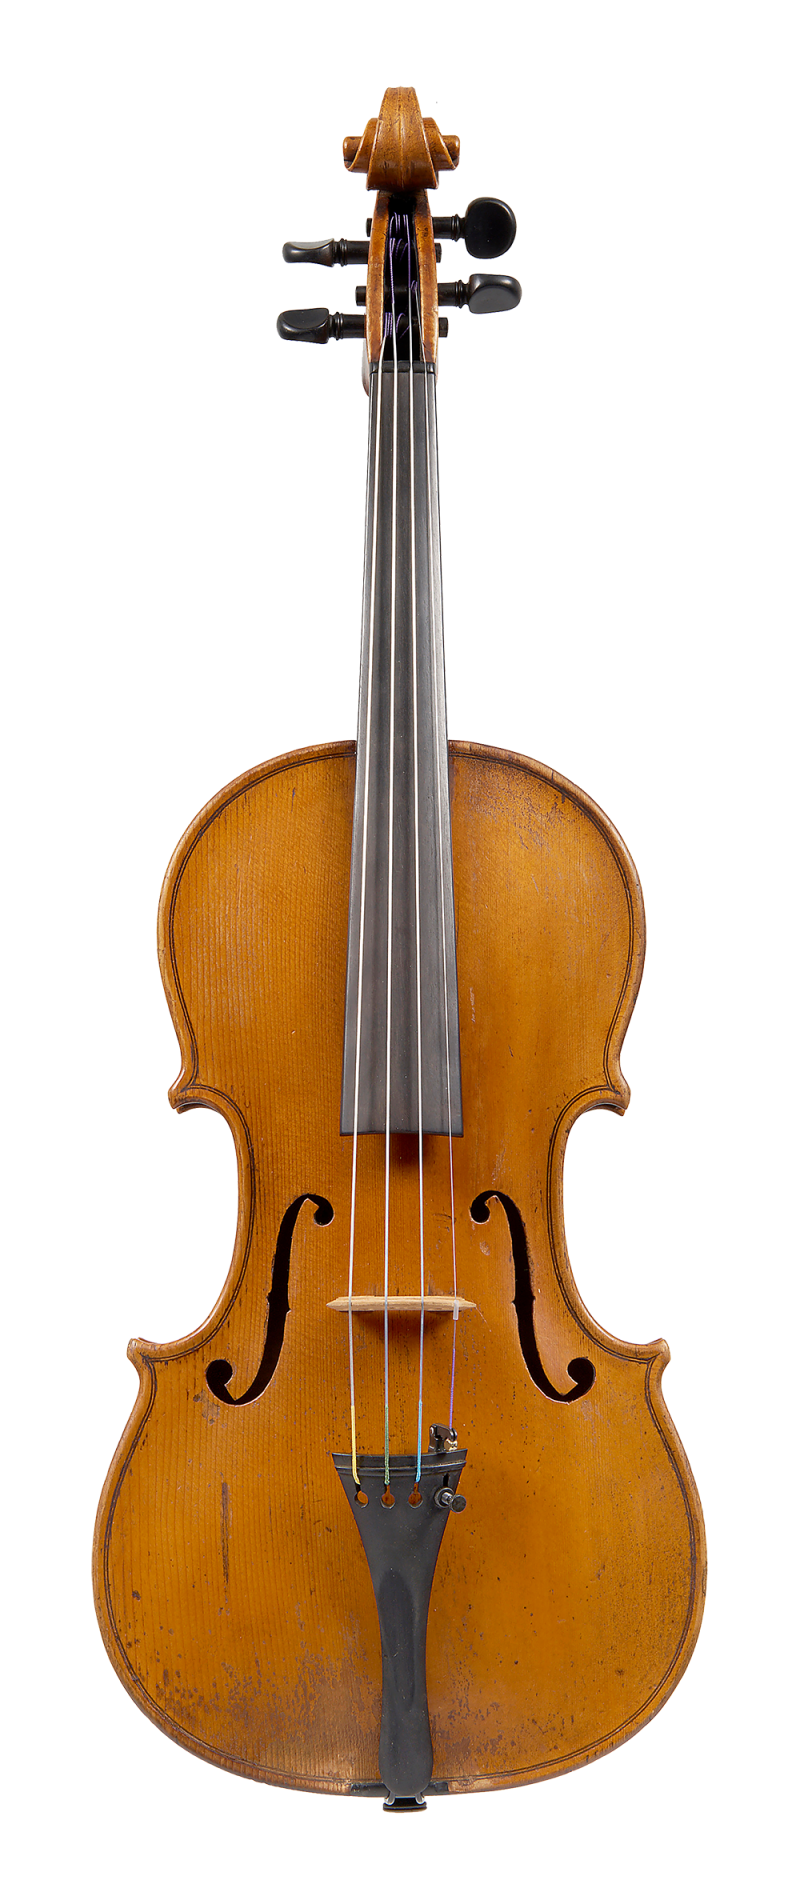 Front of a violin by Johannes Theodorus Cuypers, The Hague, 1807